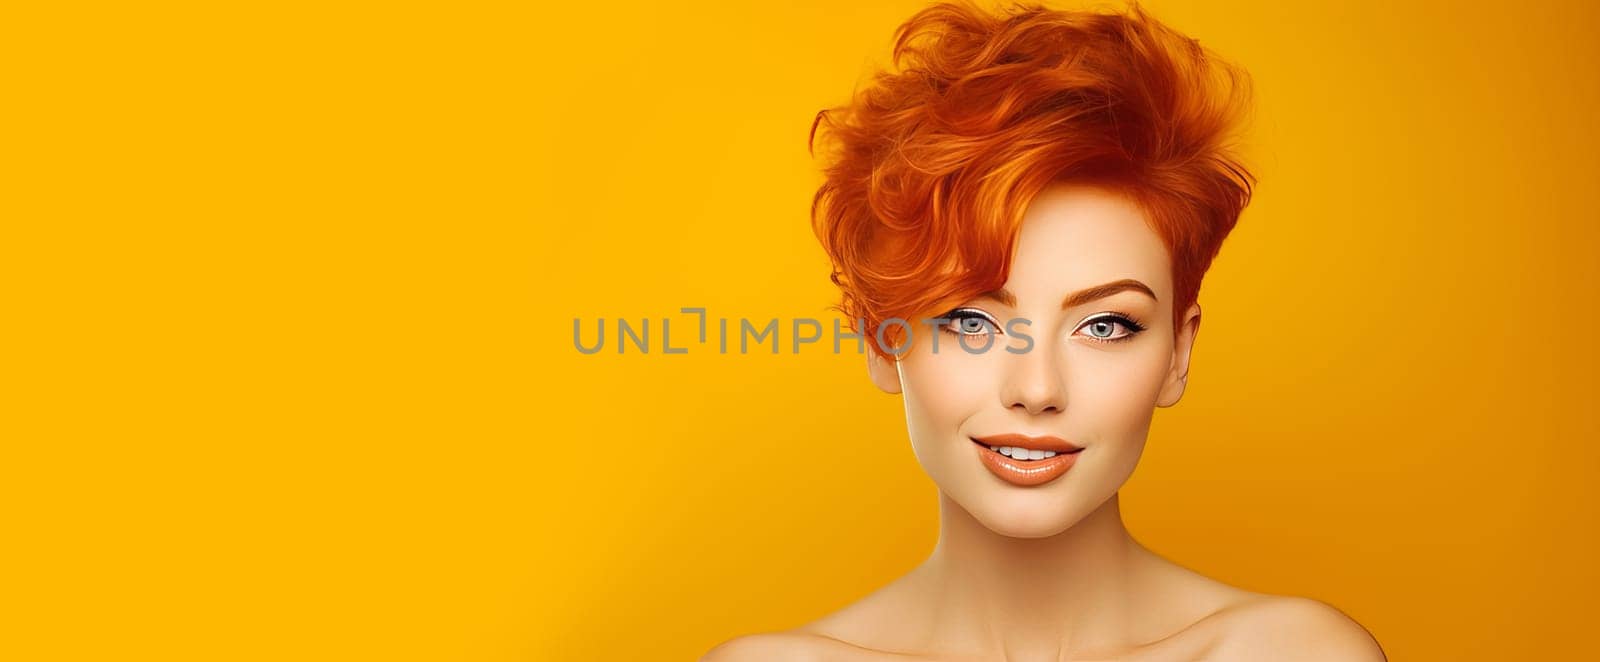 Portrait of an elegant, sexy smiling woman with perfect skin and short red hair, on a yellow background, banner. by Alla_Yurtayeva